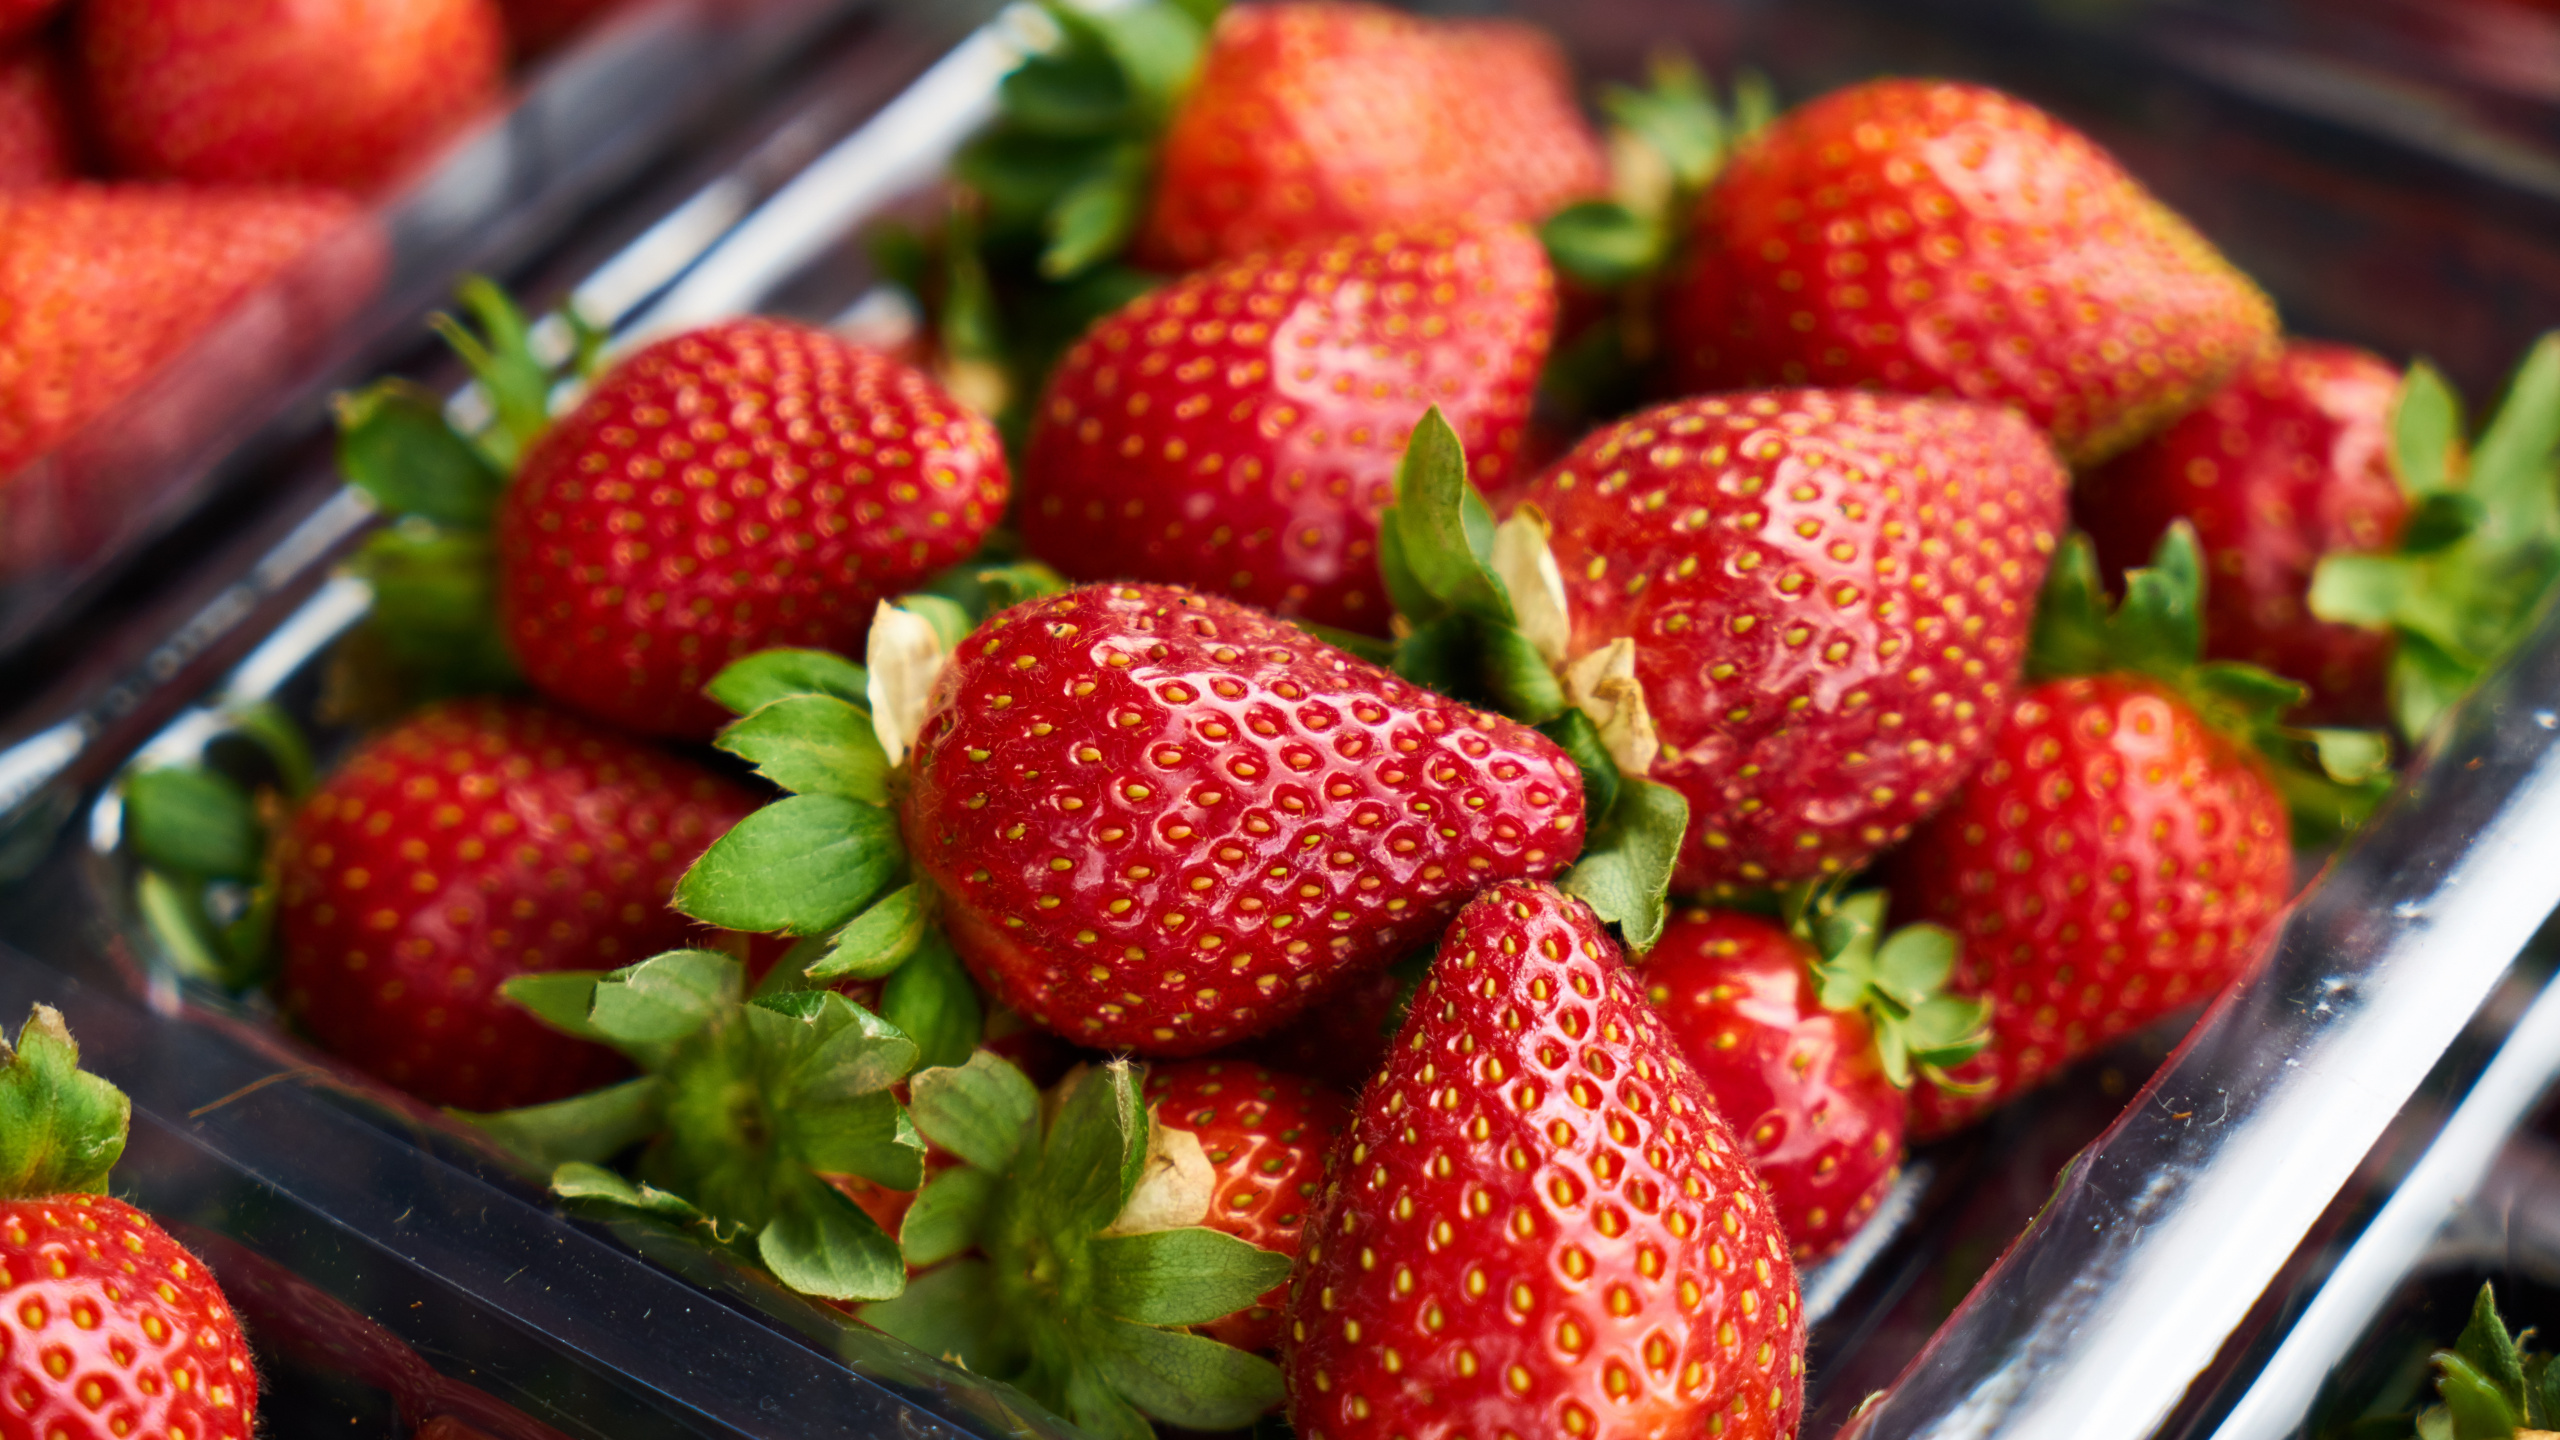 Strawberries on Stainless Steel Tray. Wallpaper in 2560x1440 Resolution